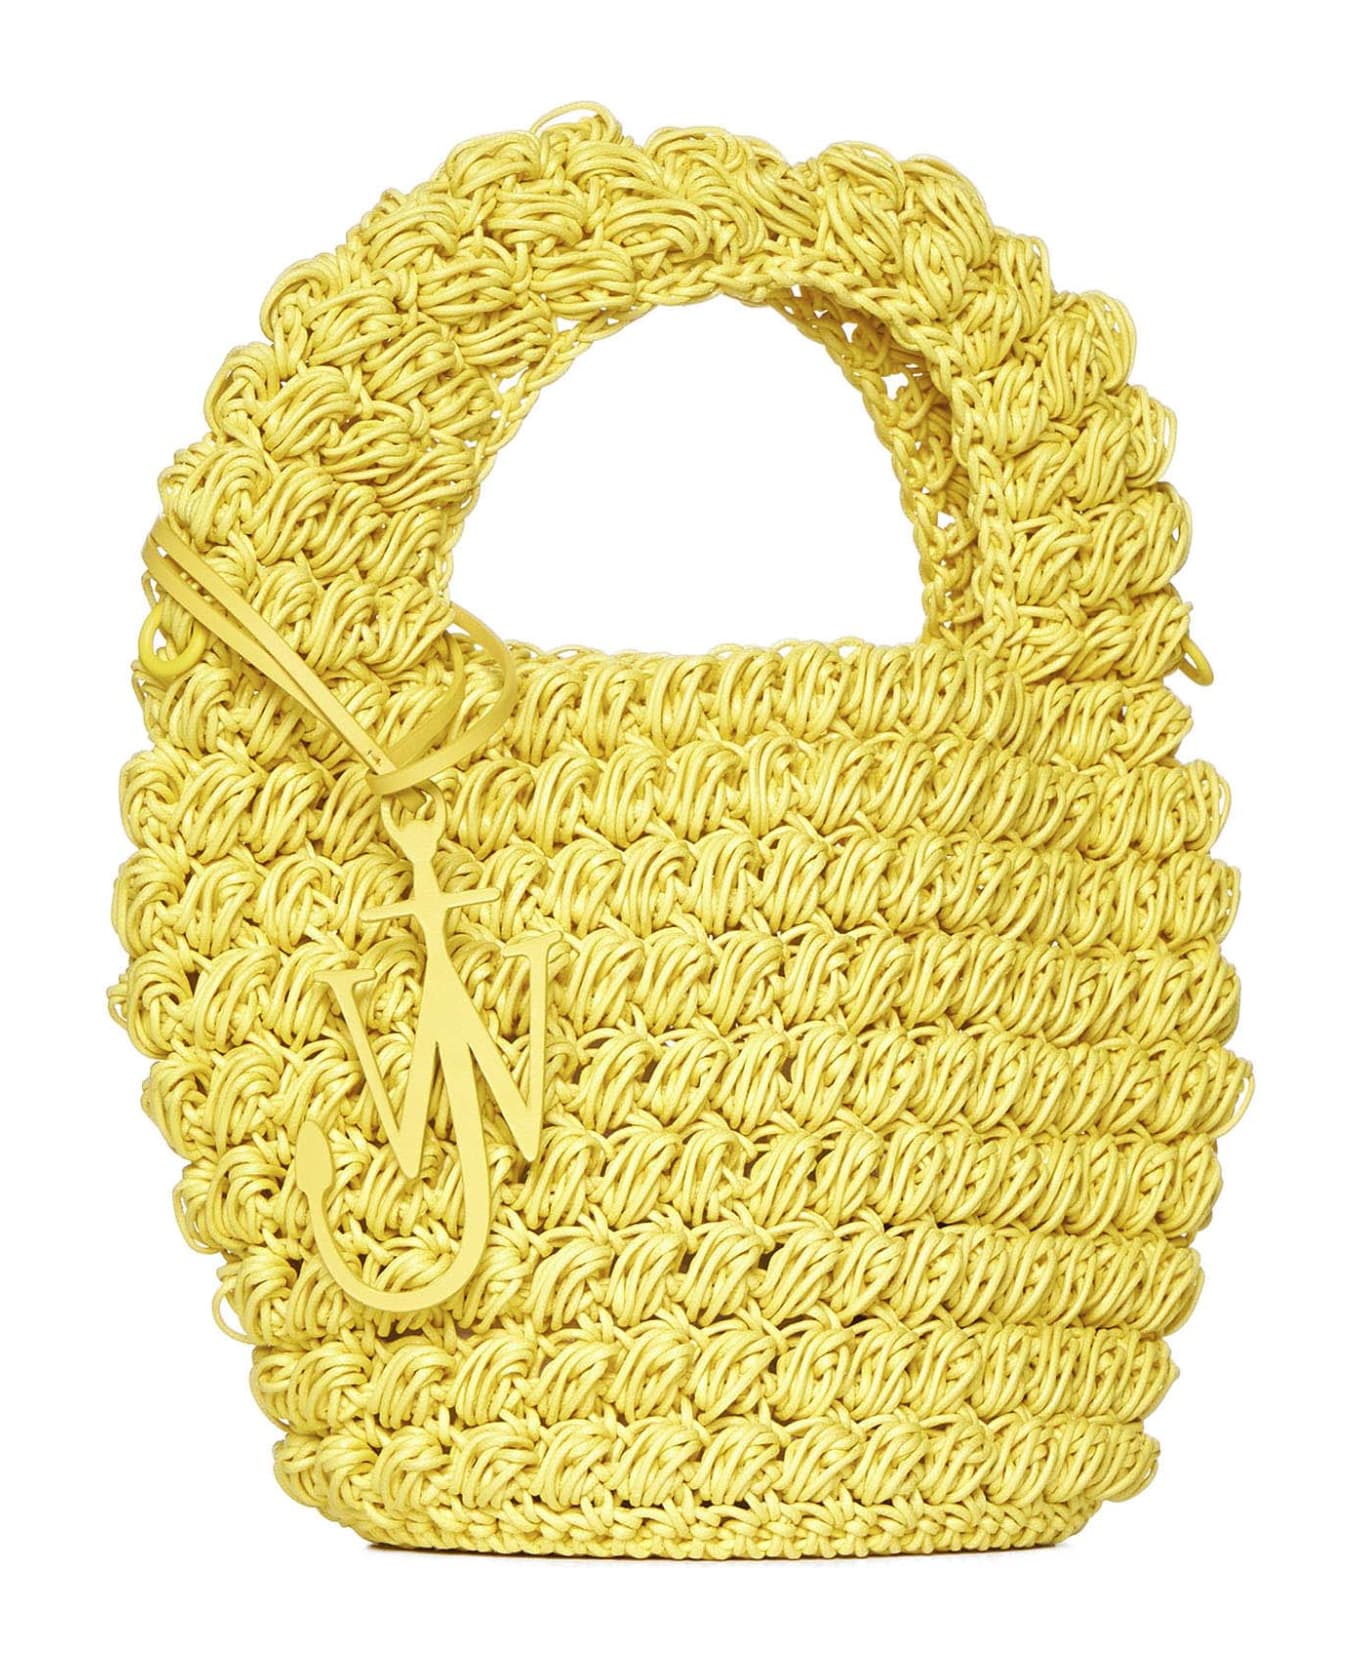 J.W. Anderson Tote - Yellow